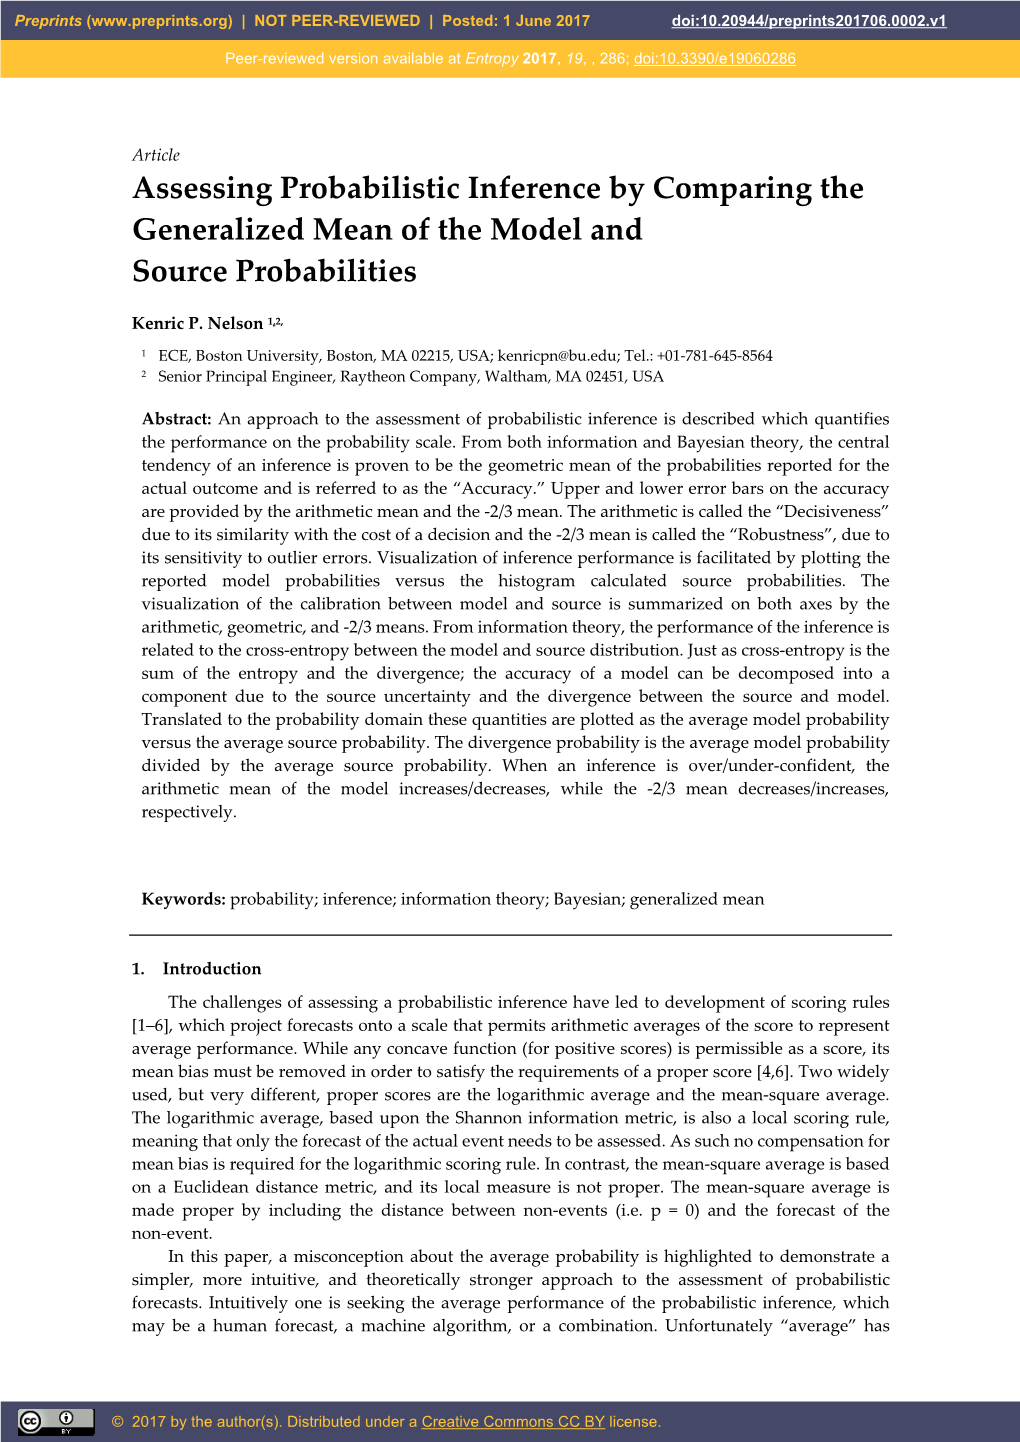 Assessing Probabilistic Inference by Comparing the Generalized Mean of the Model and Source Probabilities